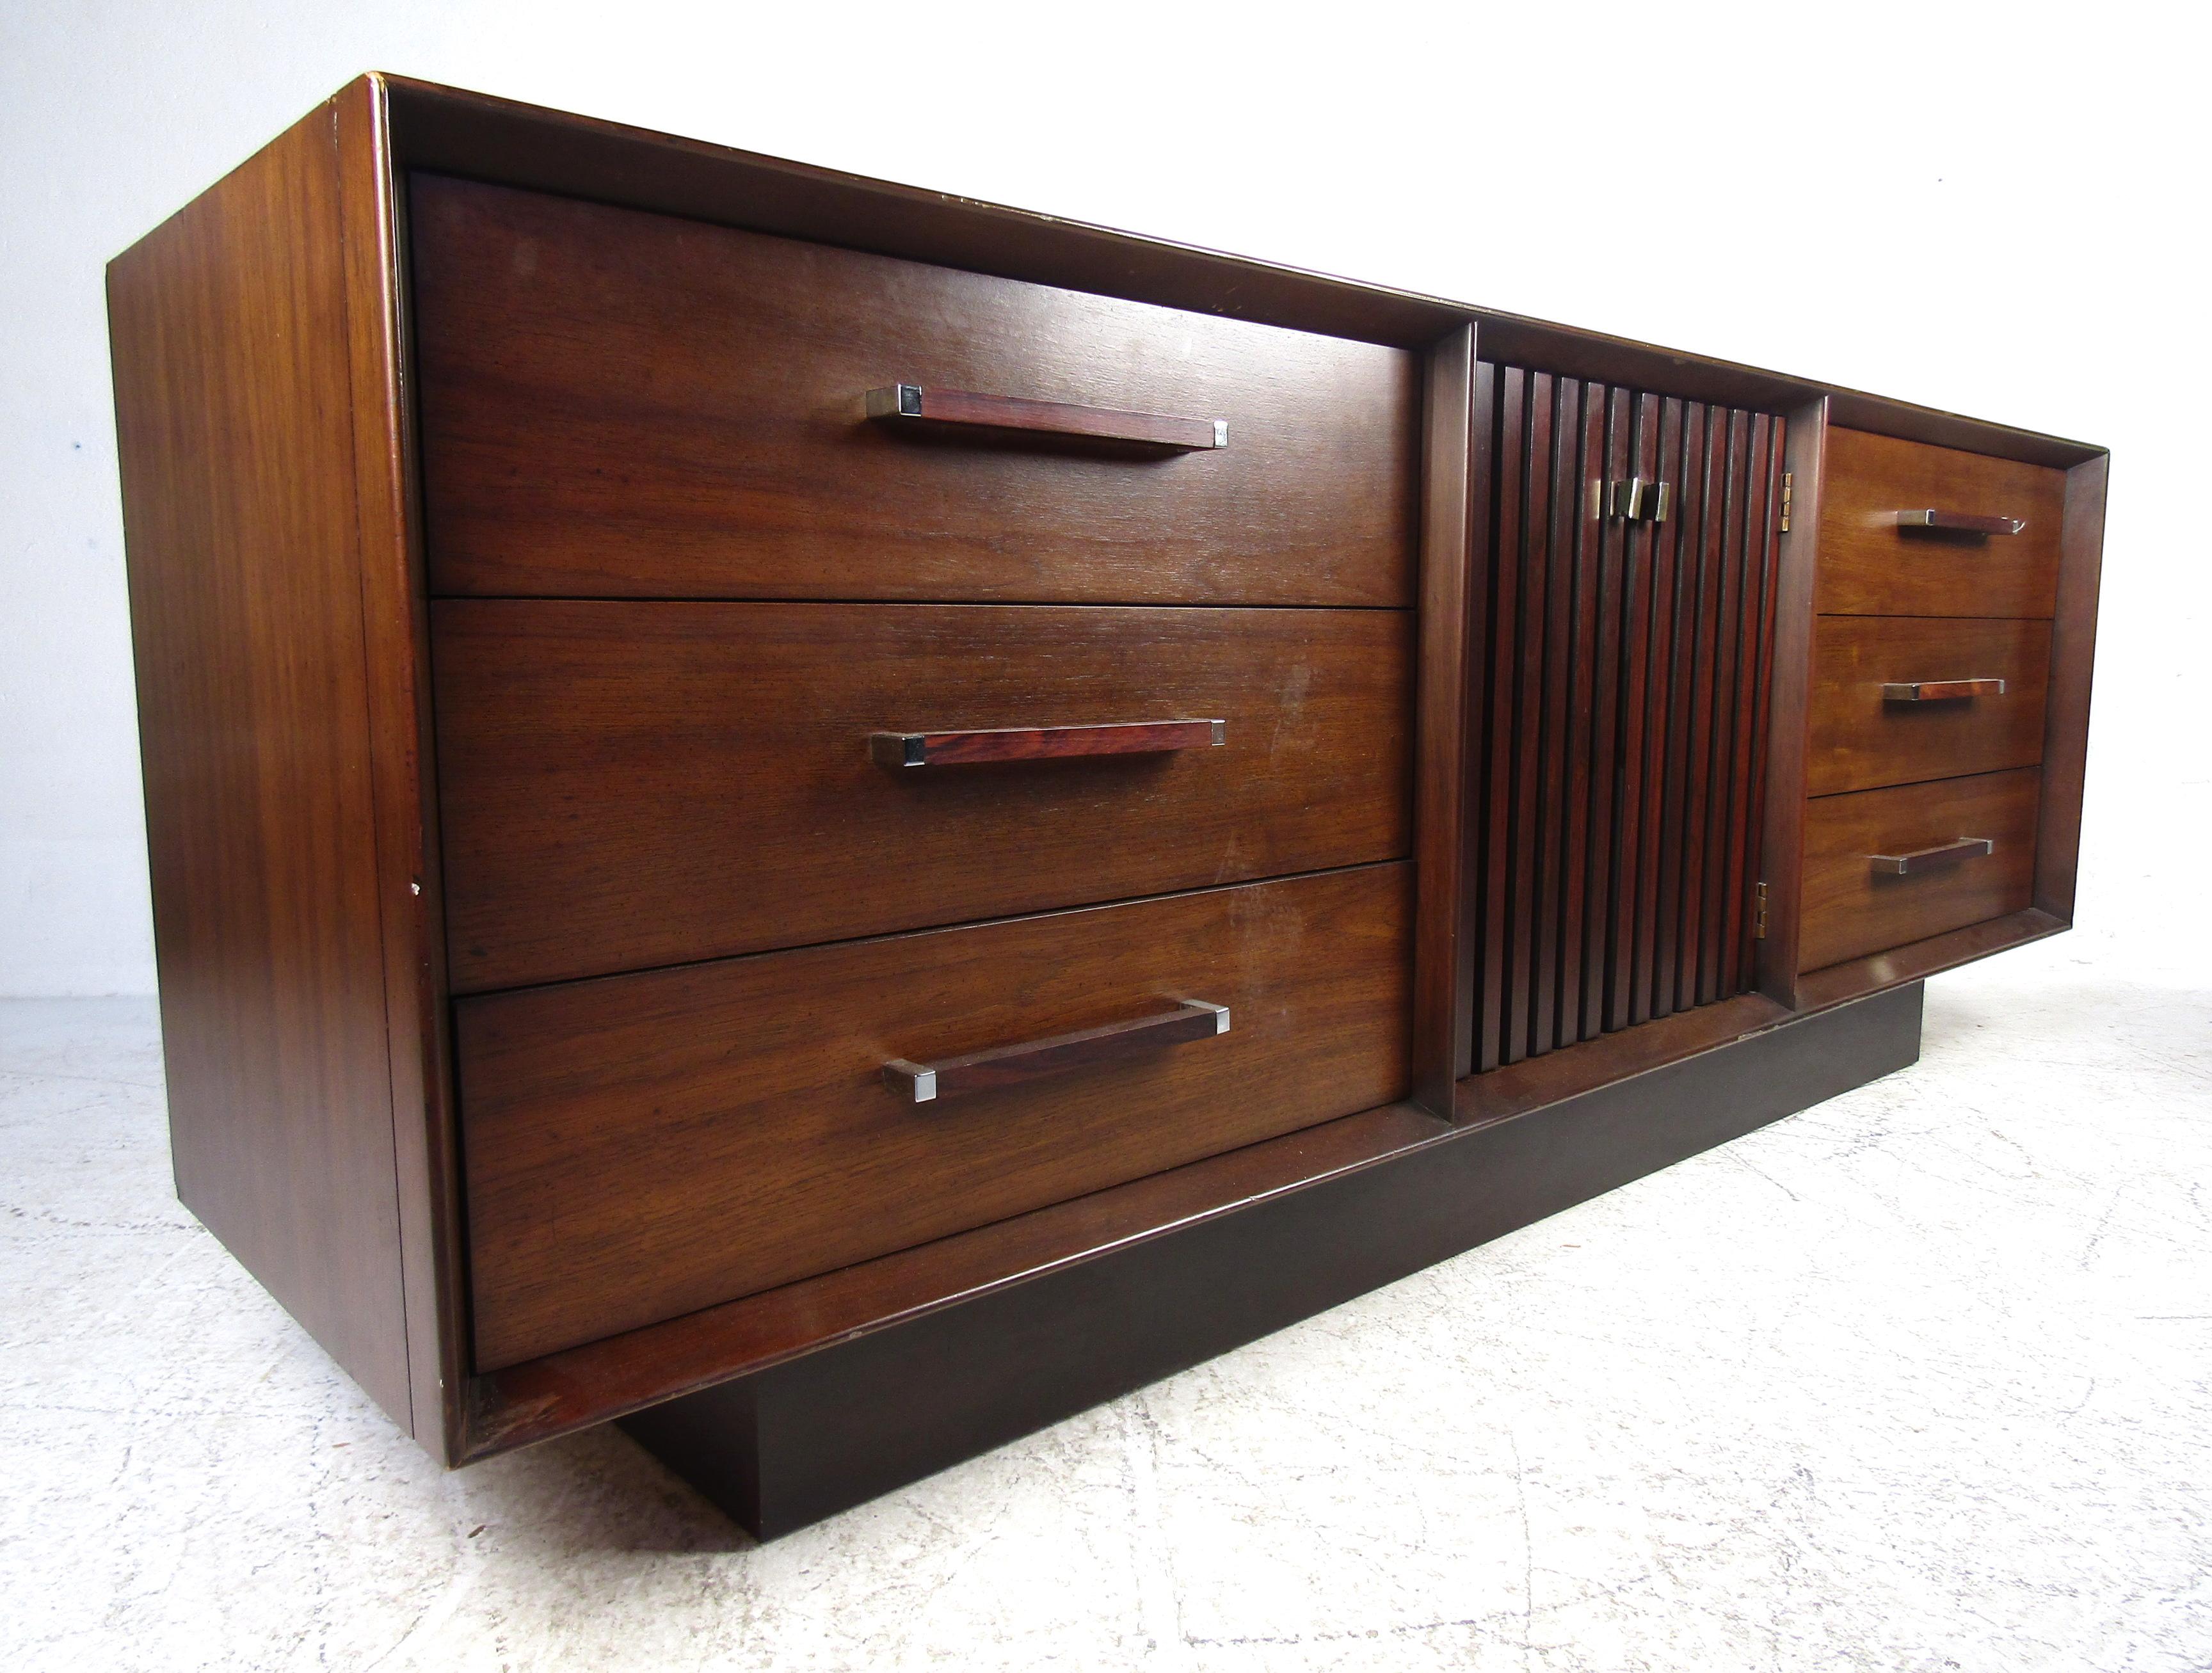 This beautiful vintage modern set includes two nightstands and a dresser. A lovely two-tone design with a walnut casing and rosewood accents/inlays. The unique rosewood and chrome drawer handles, vertical louvered cabinet doors and dovetailed